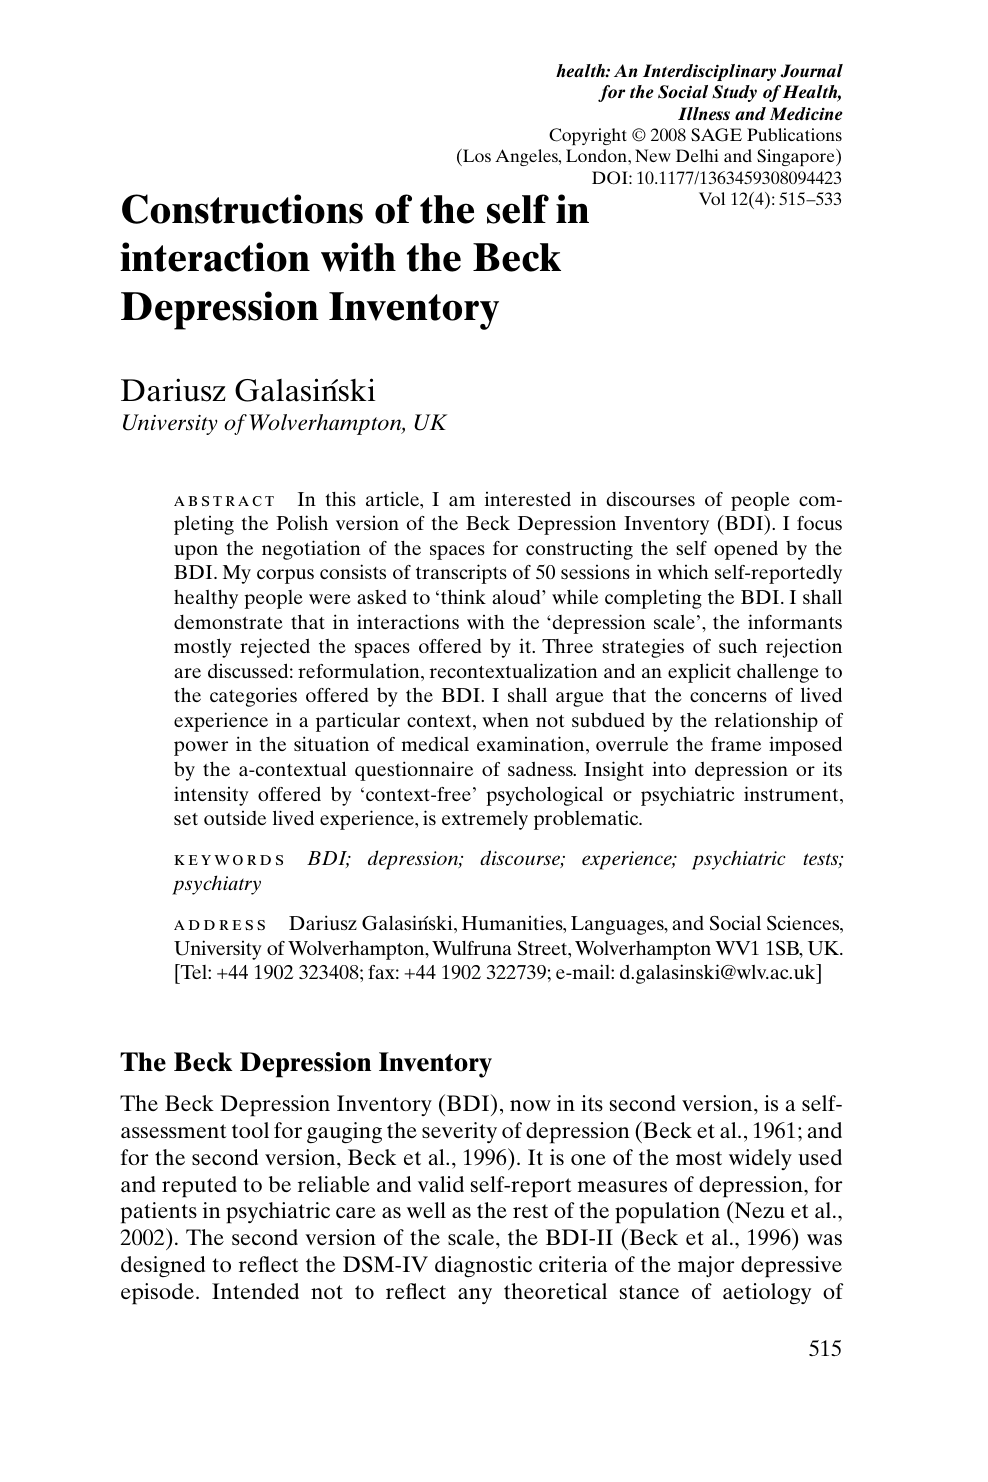 Constructions of the self in interaction with the Beck Depression Inventory  image